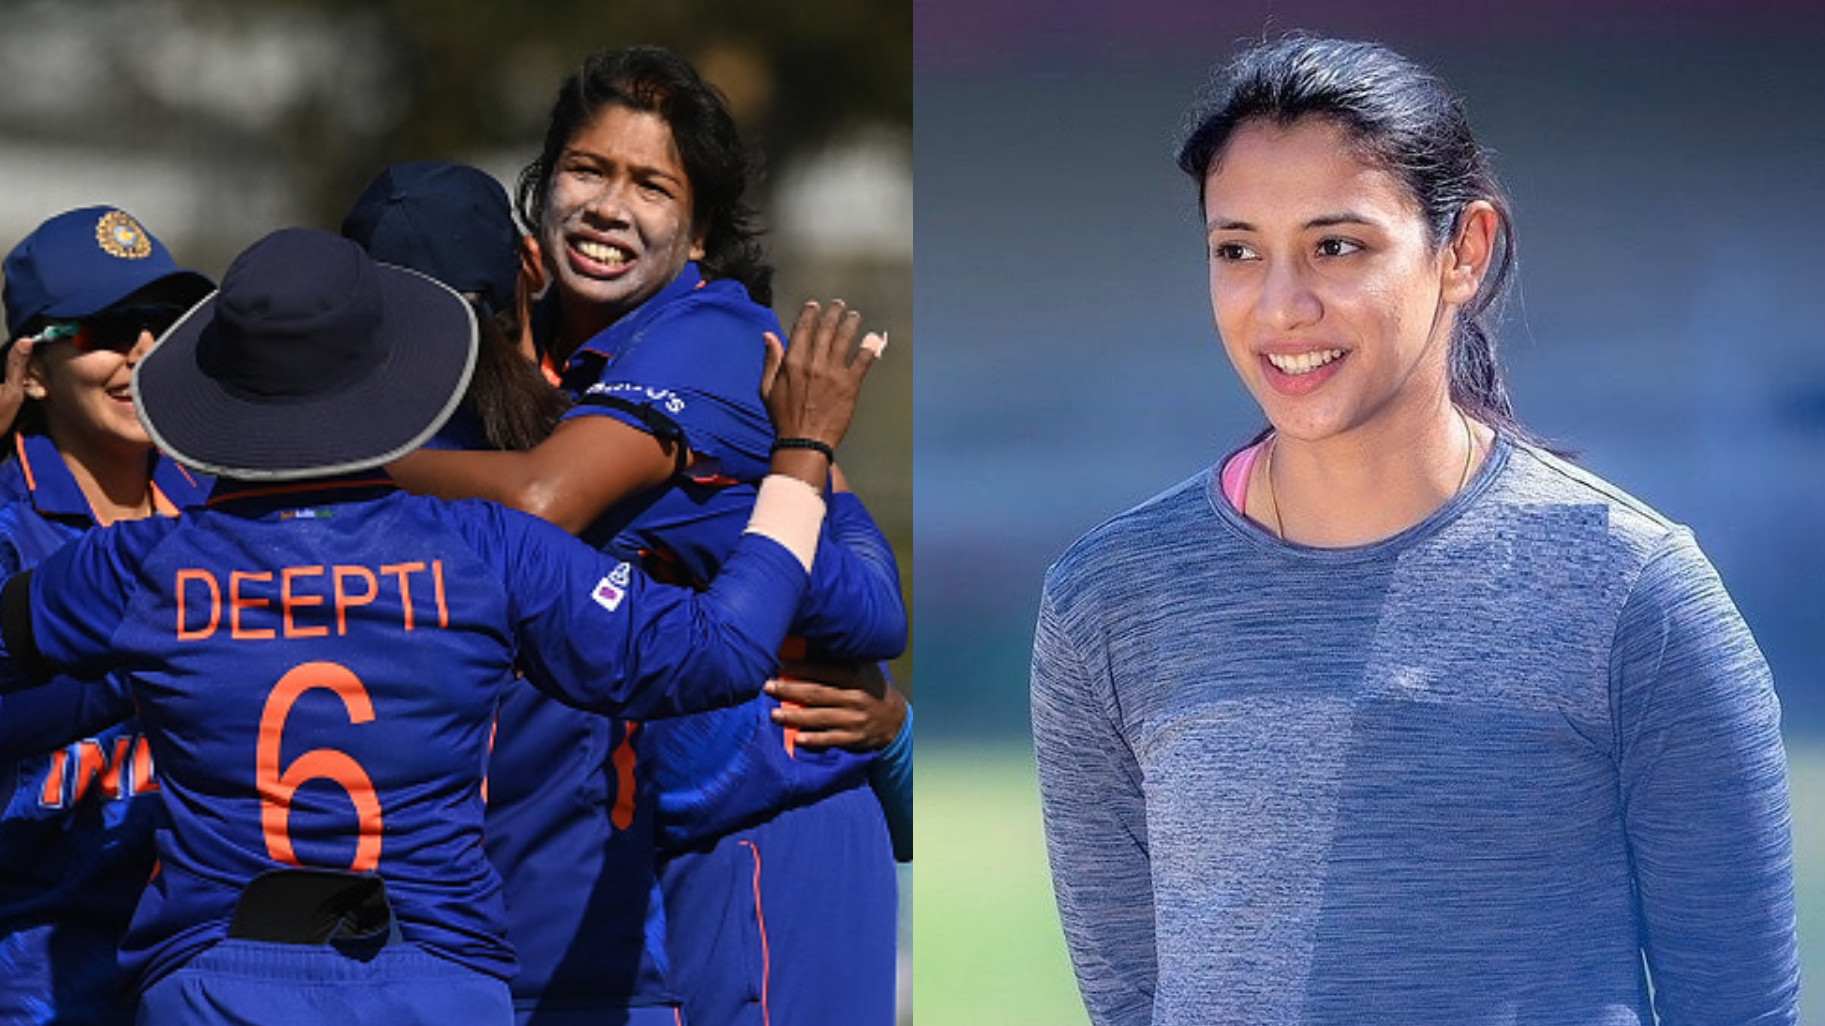 ENGW v INDW 2022: 'This series is for Jhulu di (Jhulan Goswami)'- Smriti Mandhana after win in 1st ODI